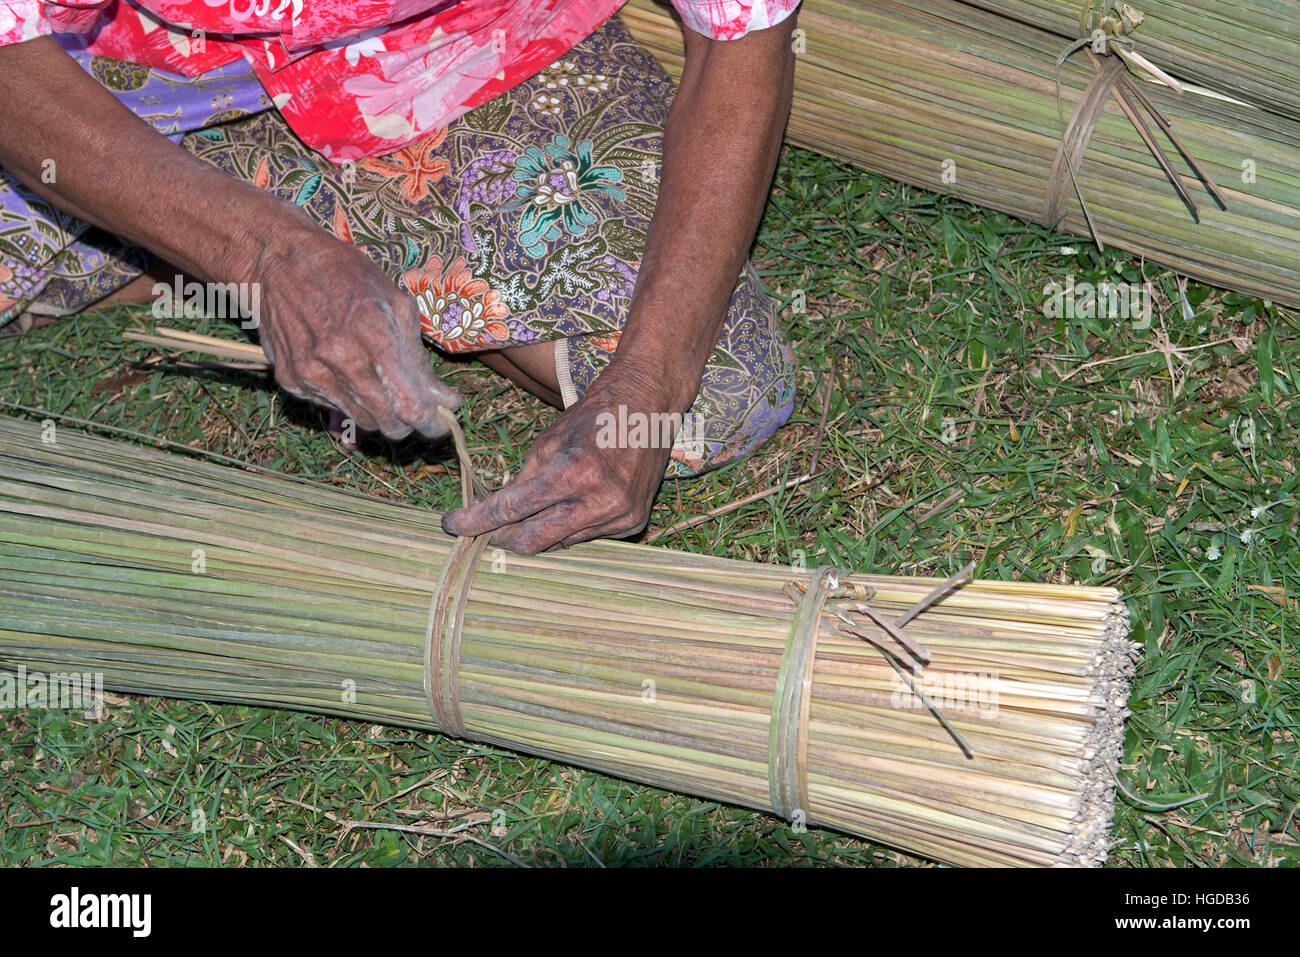 Thailand, Patthalung, Tale noi, Sorting, Separation and Tying up of the dried grey rushes or sedges, Lepirona articulata, Stock Photo